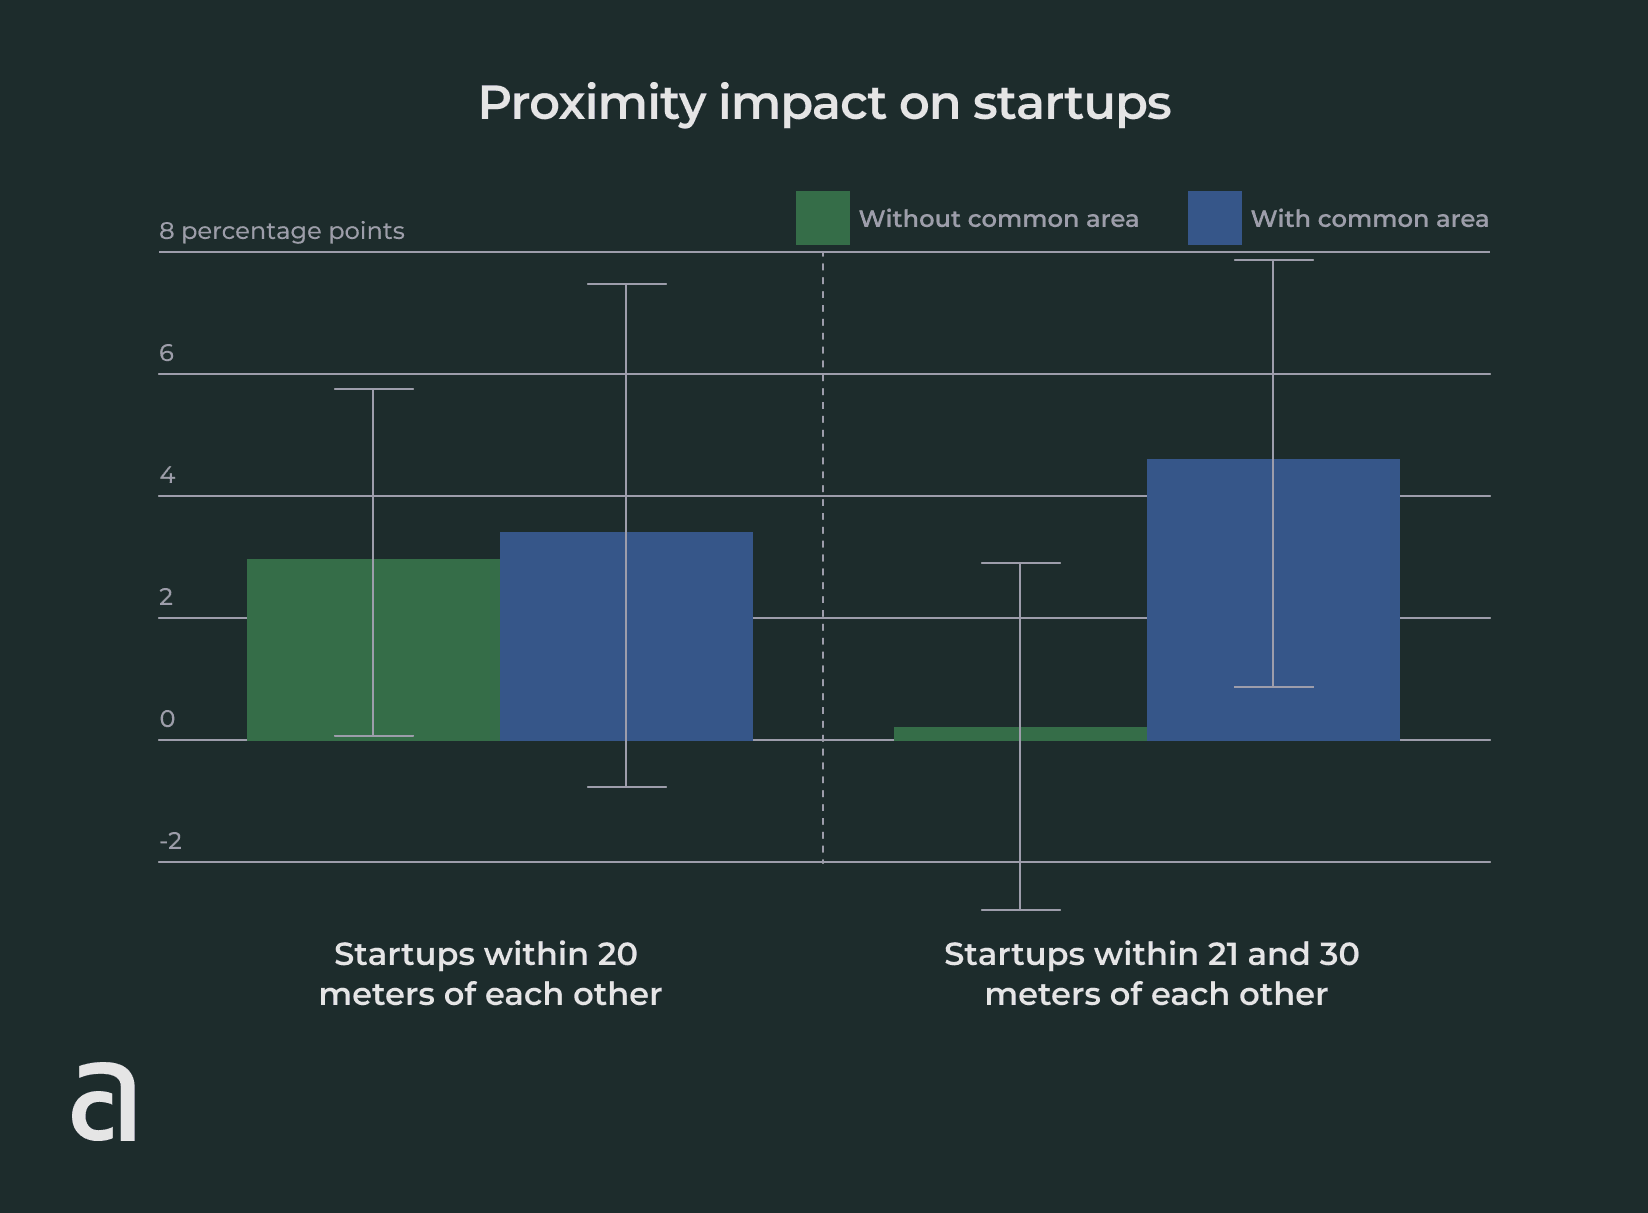 Proximity impact on startups at a coworking space